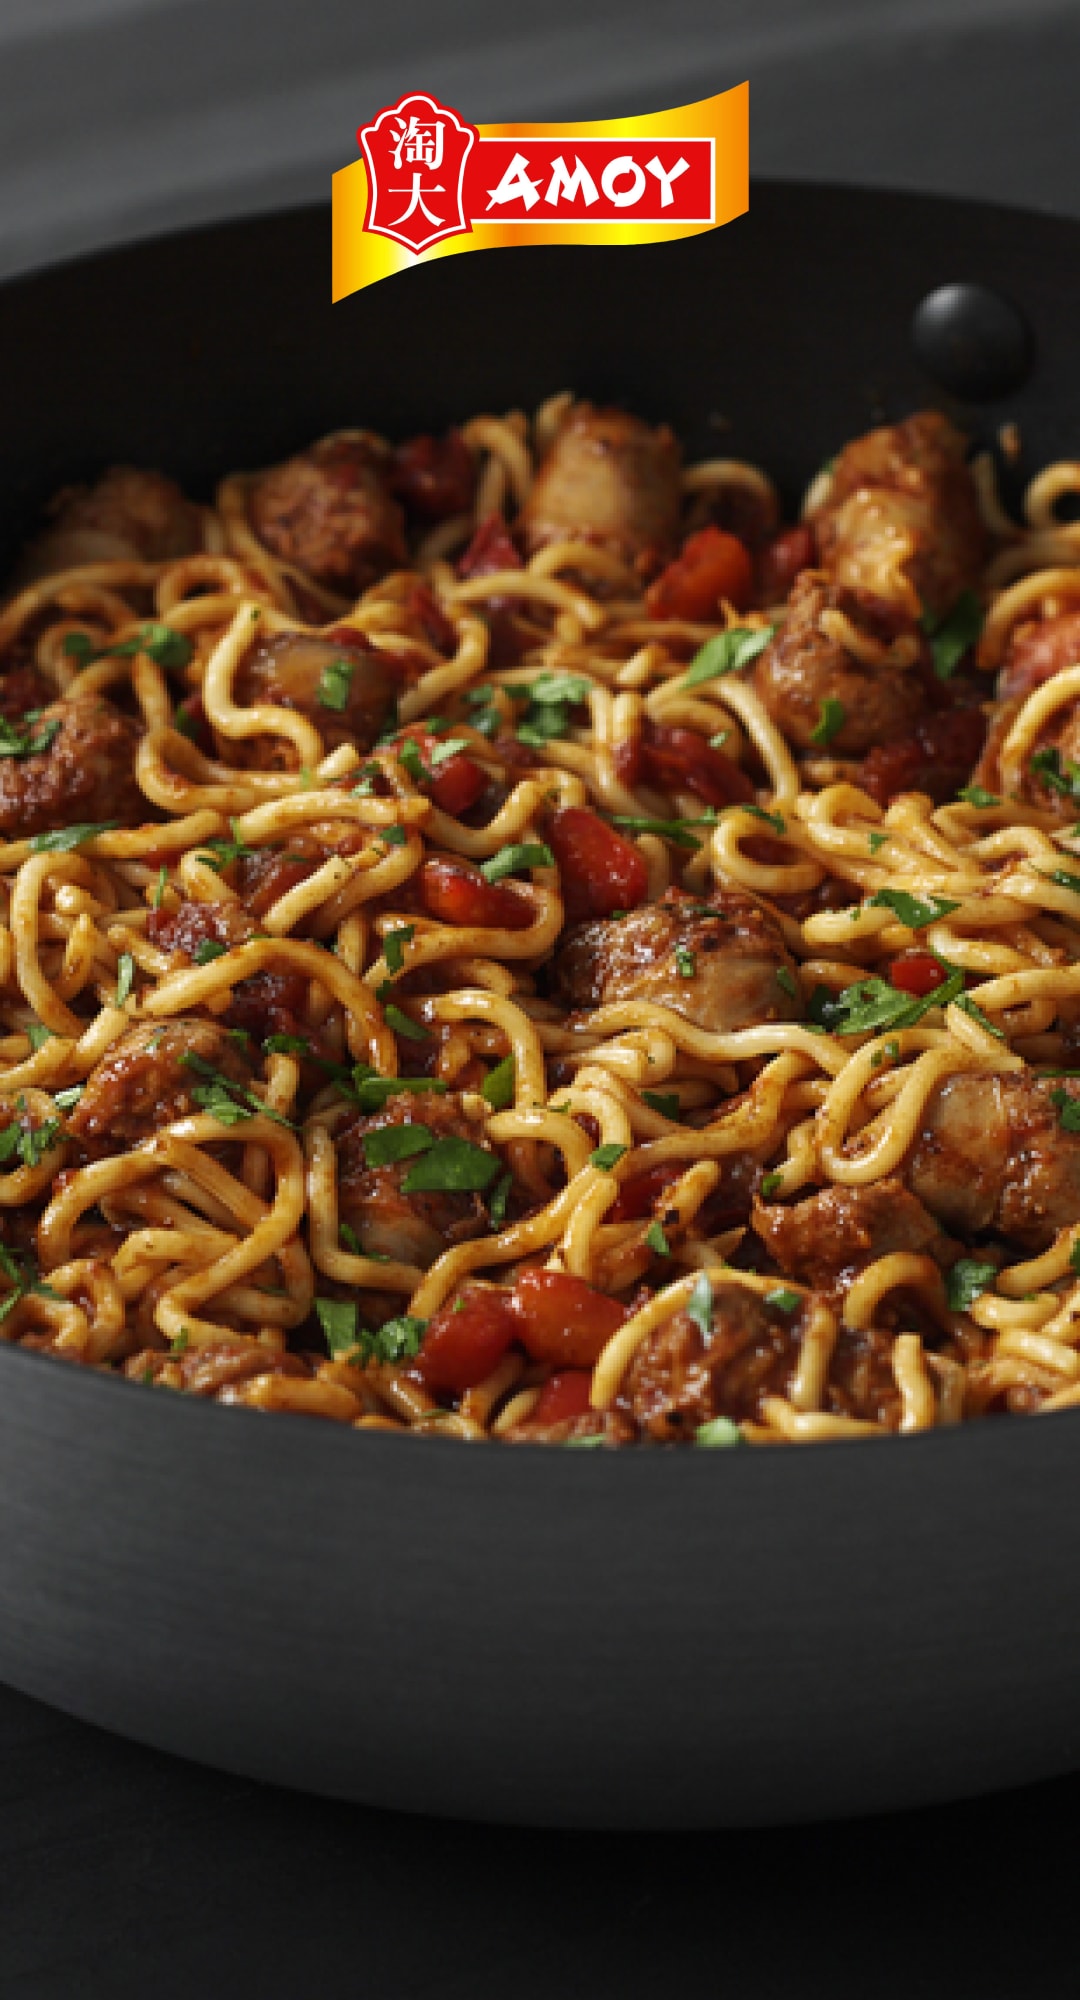 A deep pan full of saucy noodles and meatballs.